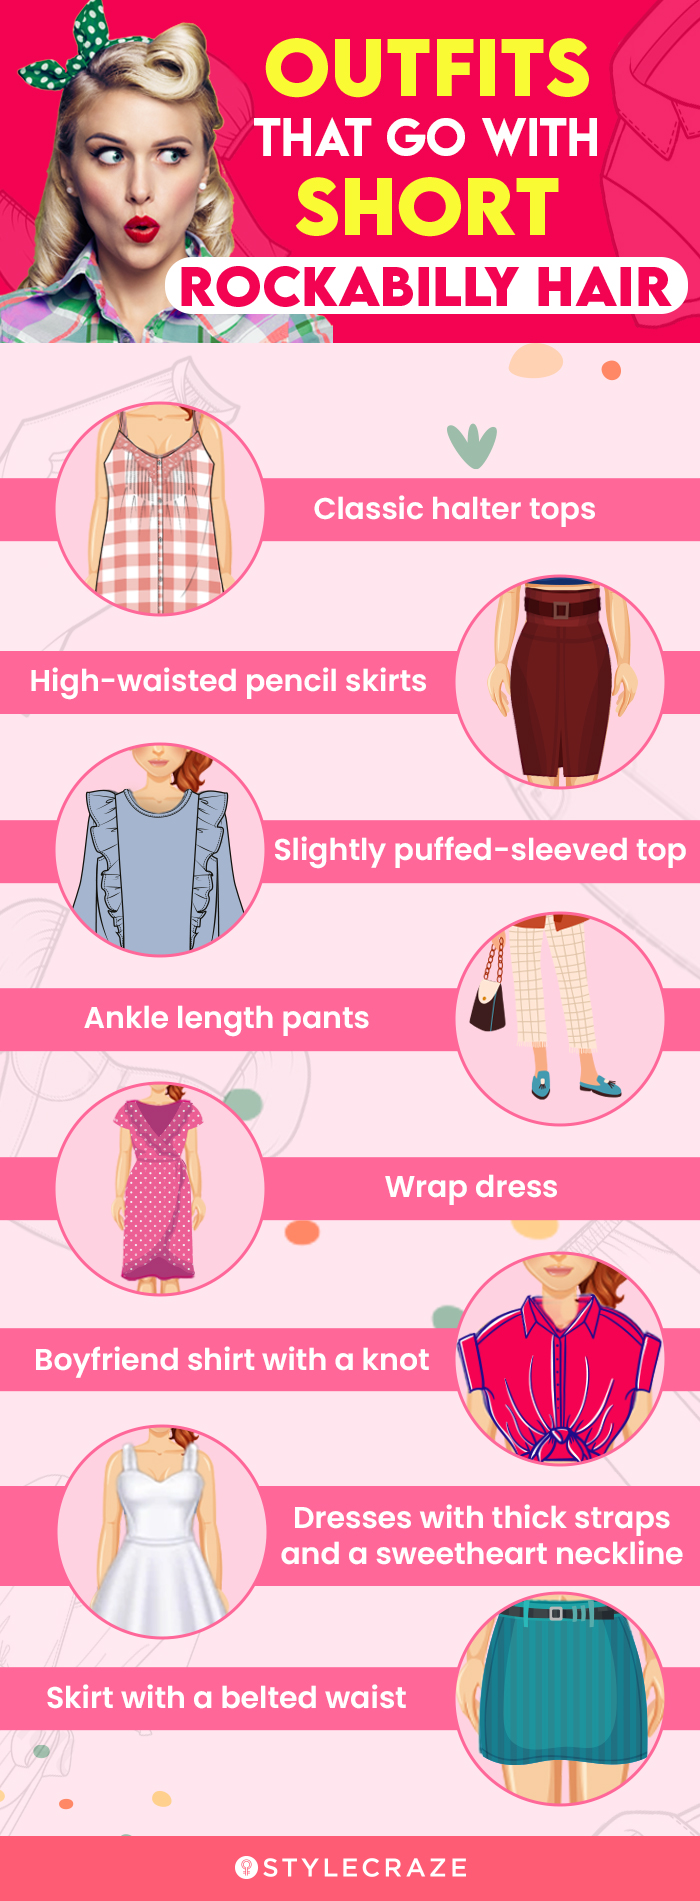 outfits that go with short rockabilly hair (infographic)